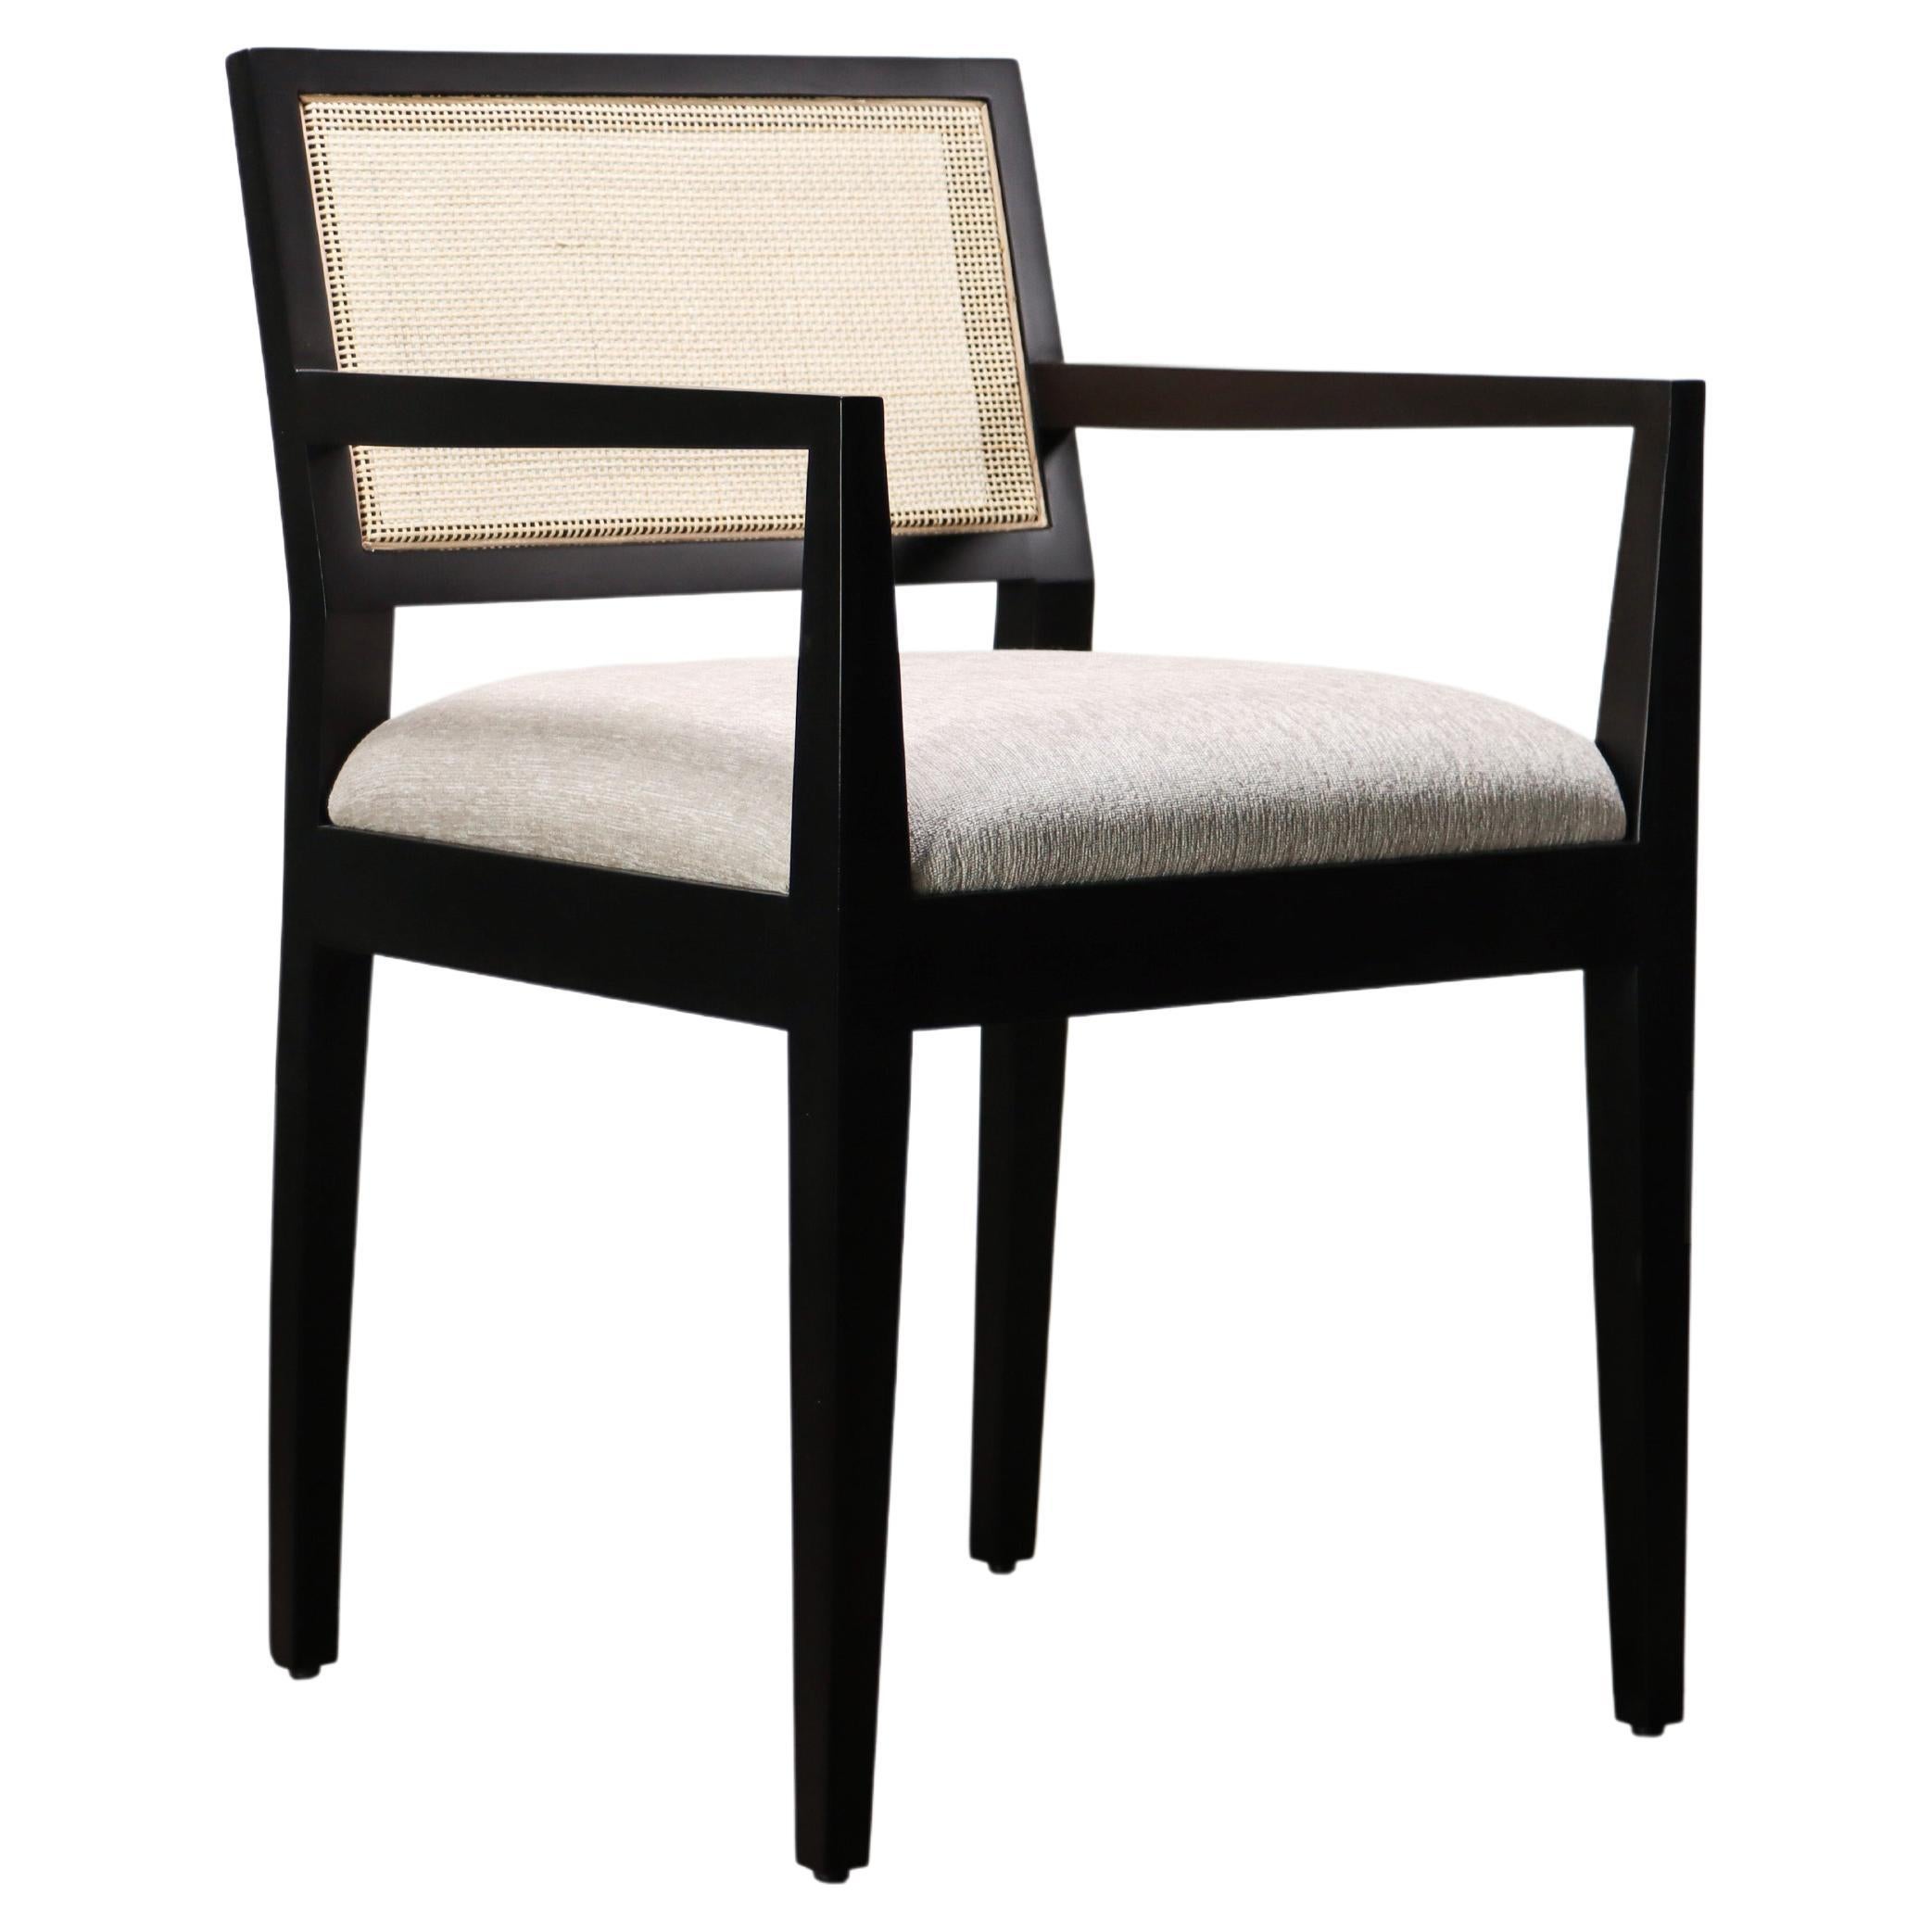 Modern Armchair with Caned Back in Ebonized Wood by Costantini, Recoleta